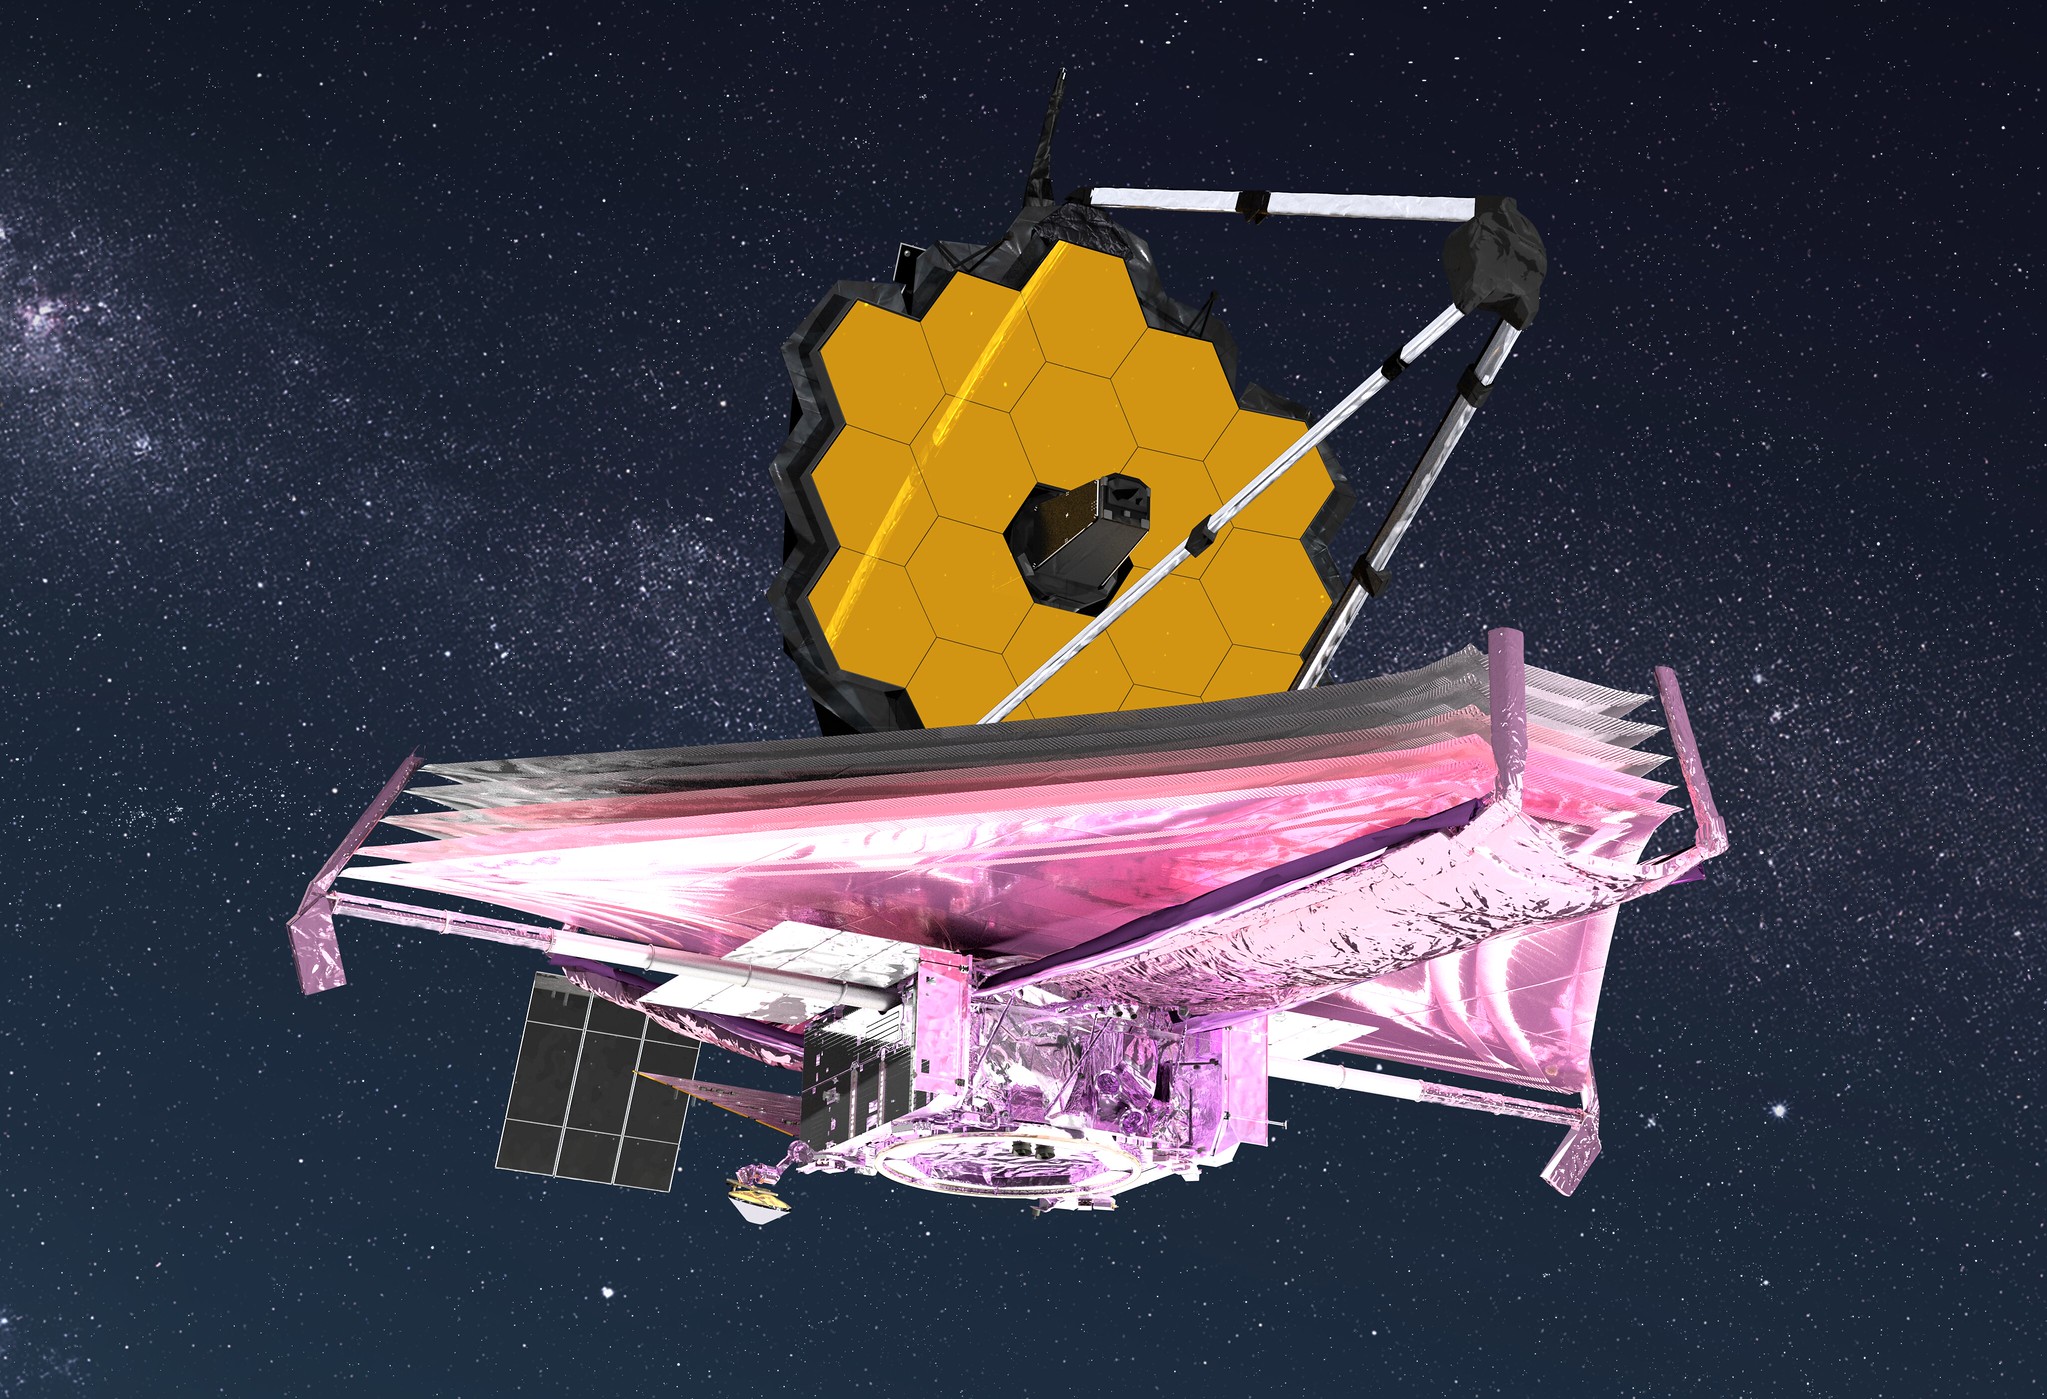 James Webb Space Telescope arrives at new home in space thumbnail